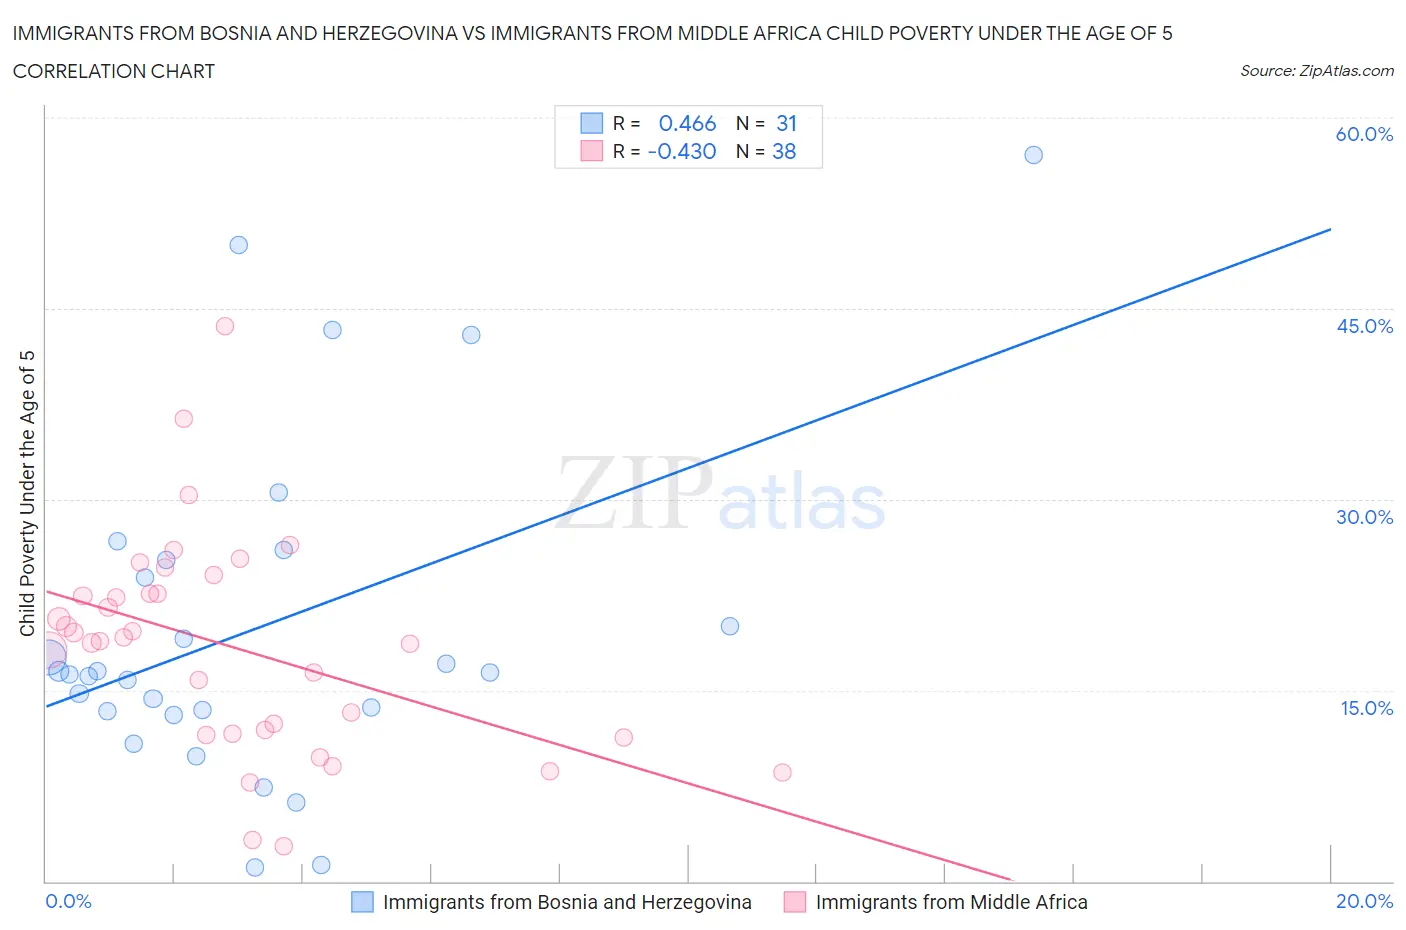 Immigrants from Bosnia and Herzegovina vs Immigrants from Middle Africa Child Poverty Under the Age of 5